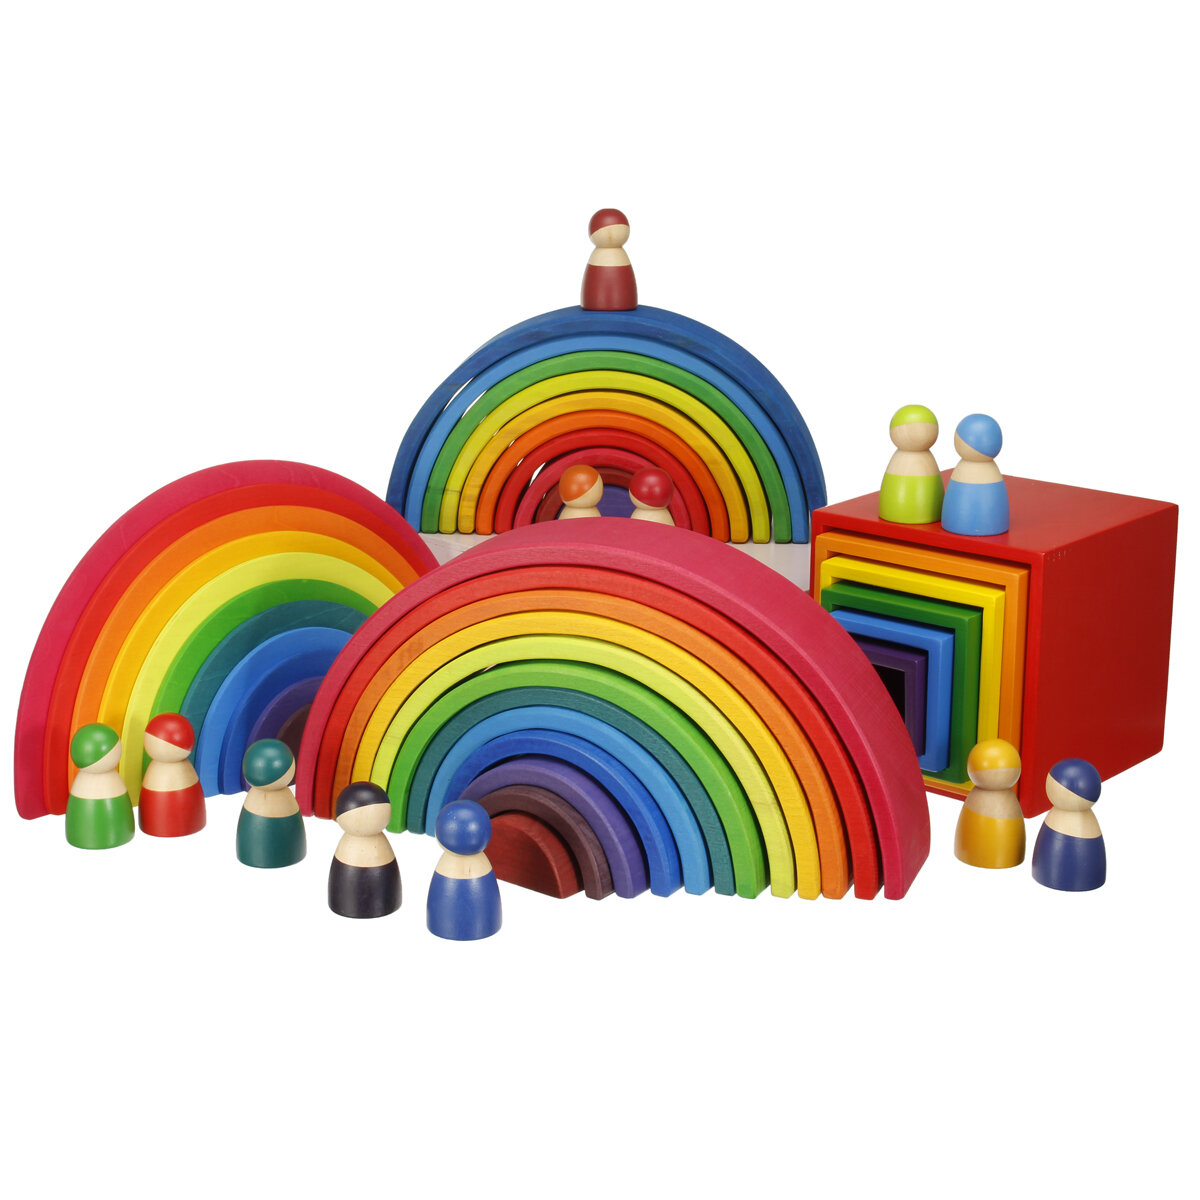 6/12PCS Colorful Wooden Baby Building Blocks Children Toy Kids Gifts Improve Creativity＆Thinking Ability